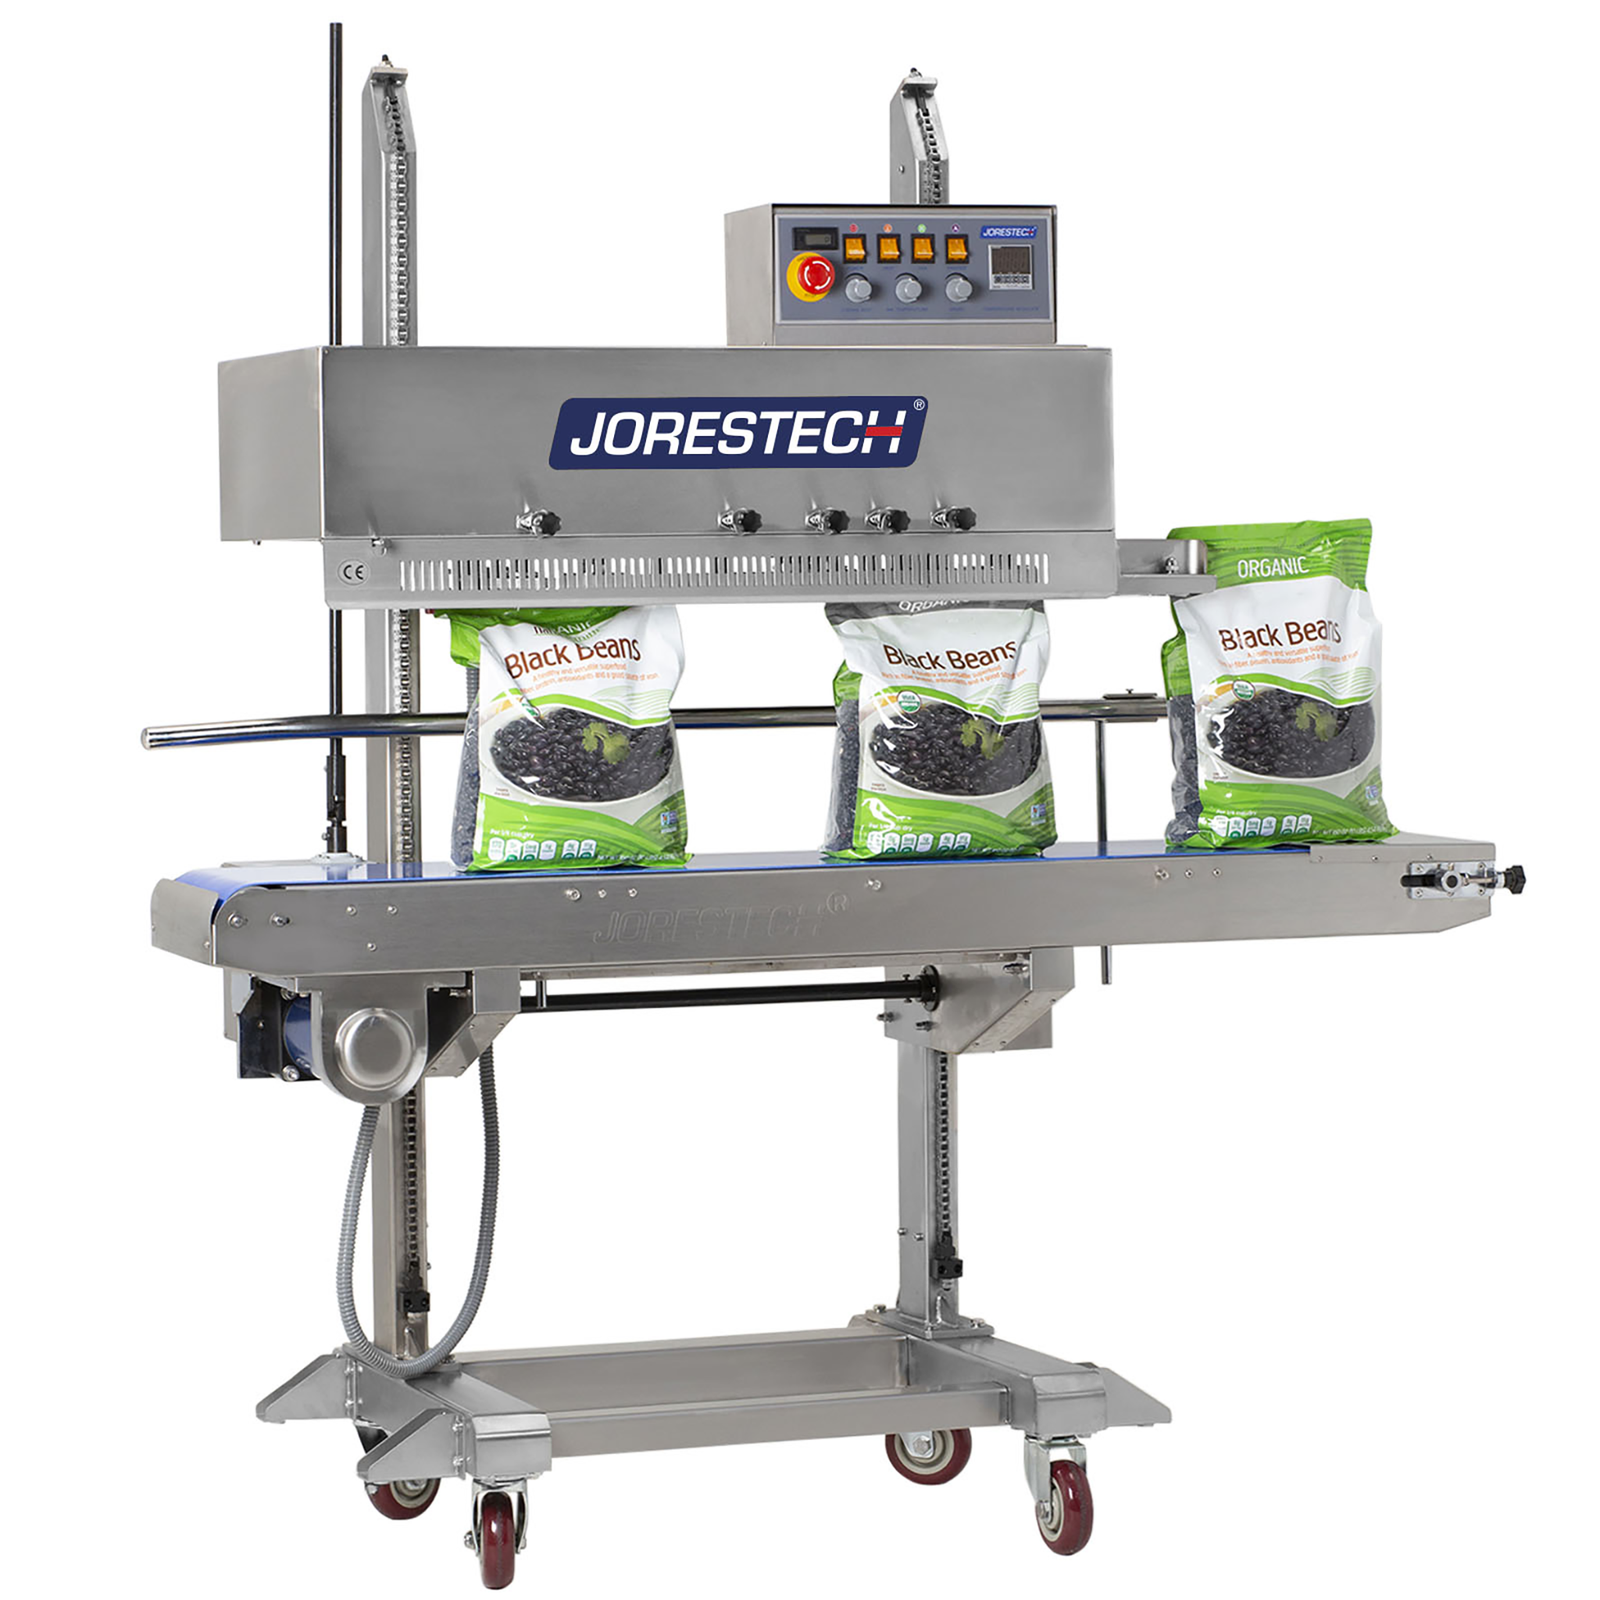 Stainless steel digital vertical continuous band sealer with coder revolving belt, emergency stop button and wheels. 